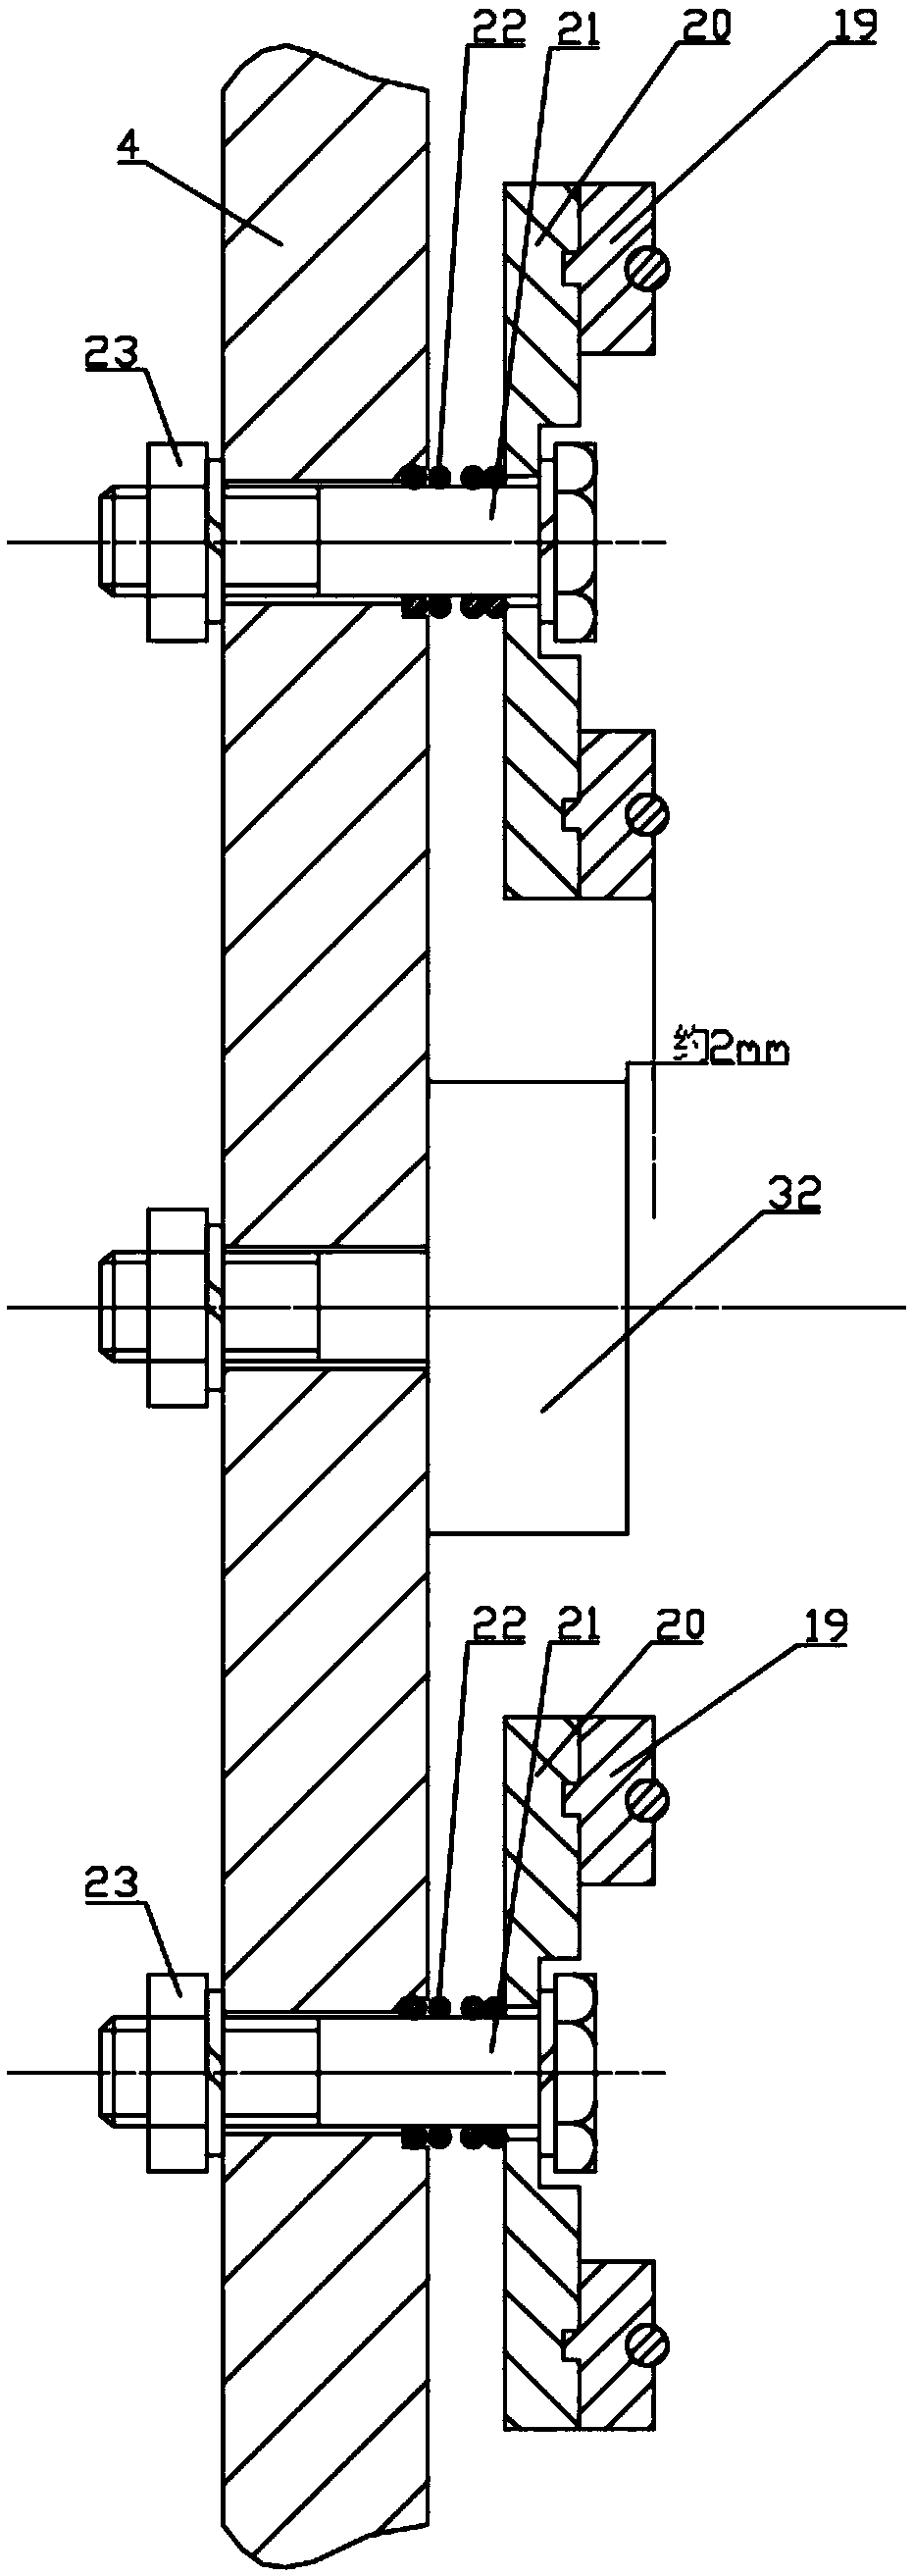 Automated three-degree-of-freedom fixture for blisk polishing and grinding